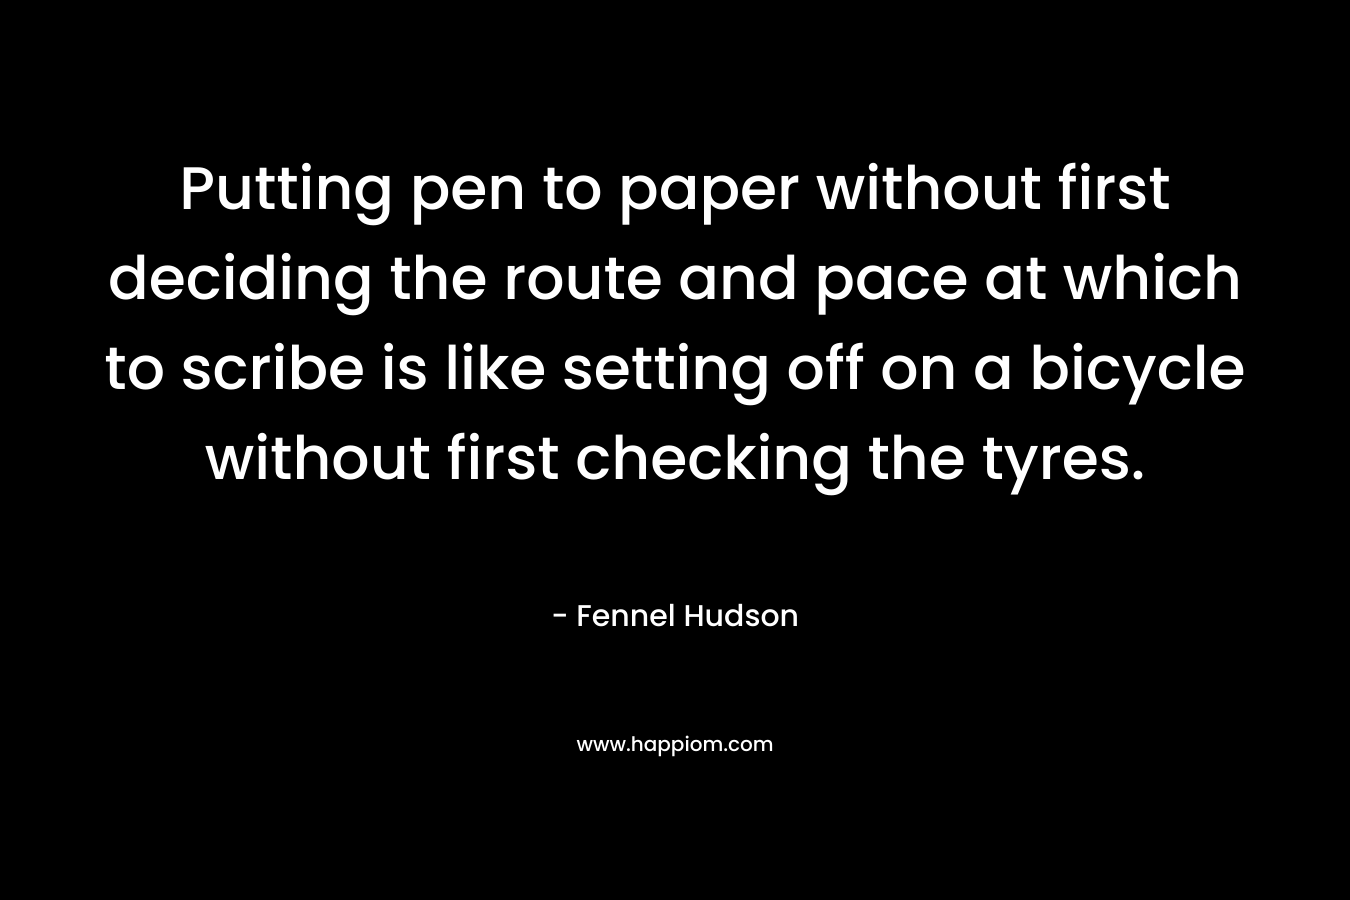 Putting pen to paper without first deciding the route and pace at which to scribe is like setting off on a bicycle without first checking the tyres. – Fennel Hudson